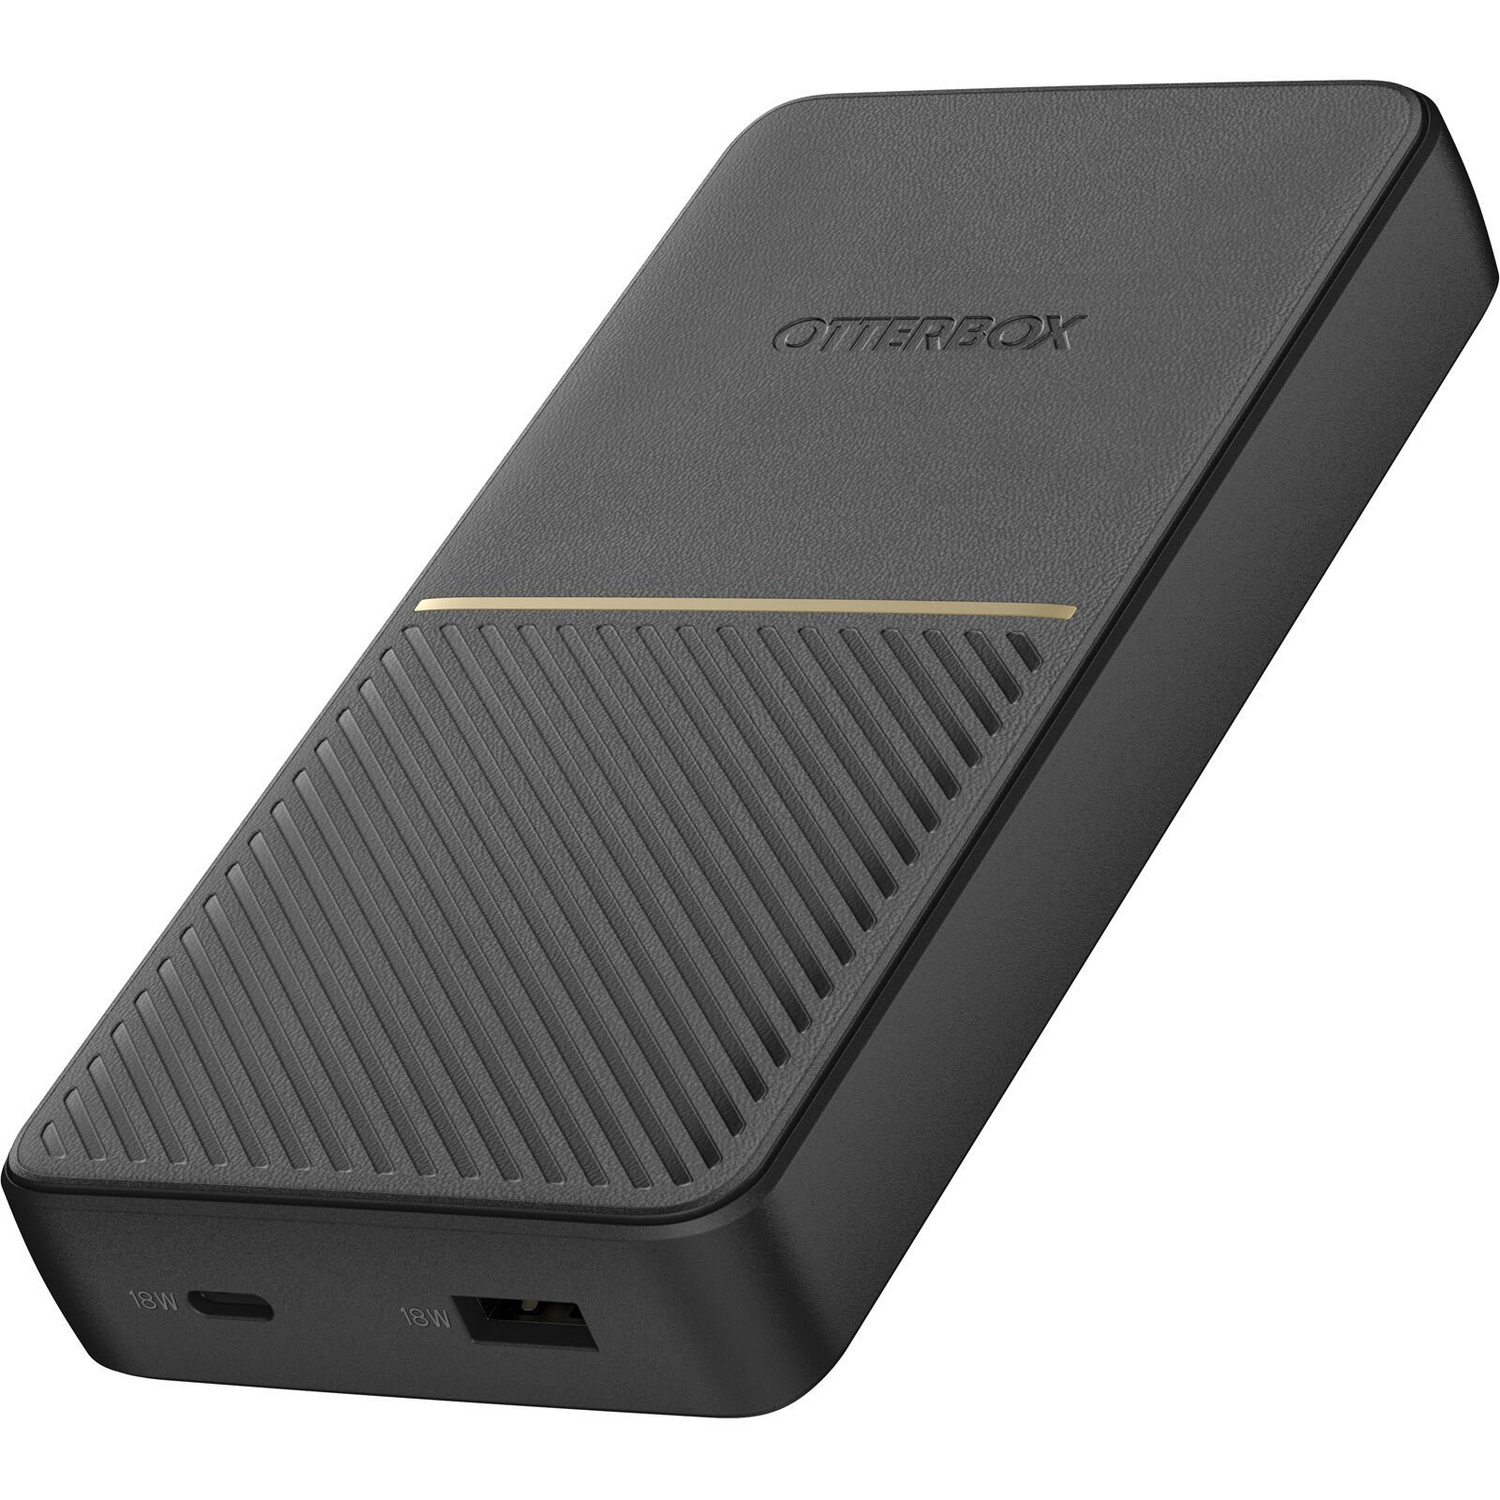 Power Bank - Fast Charge 6